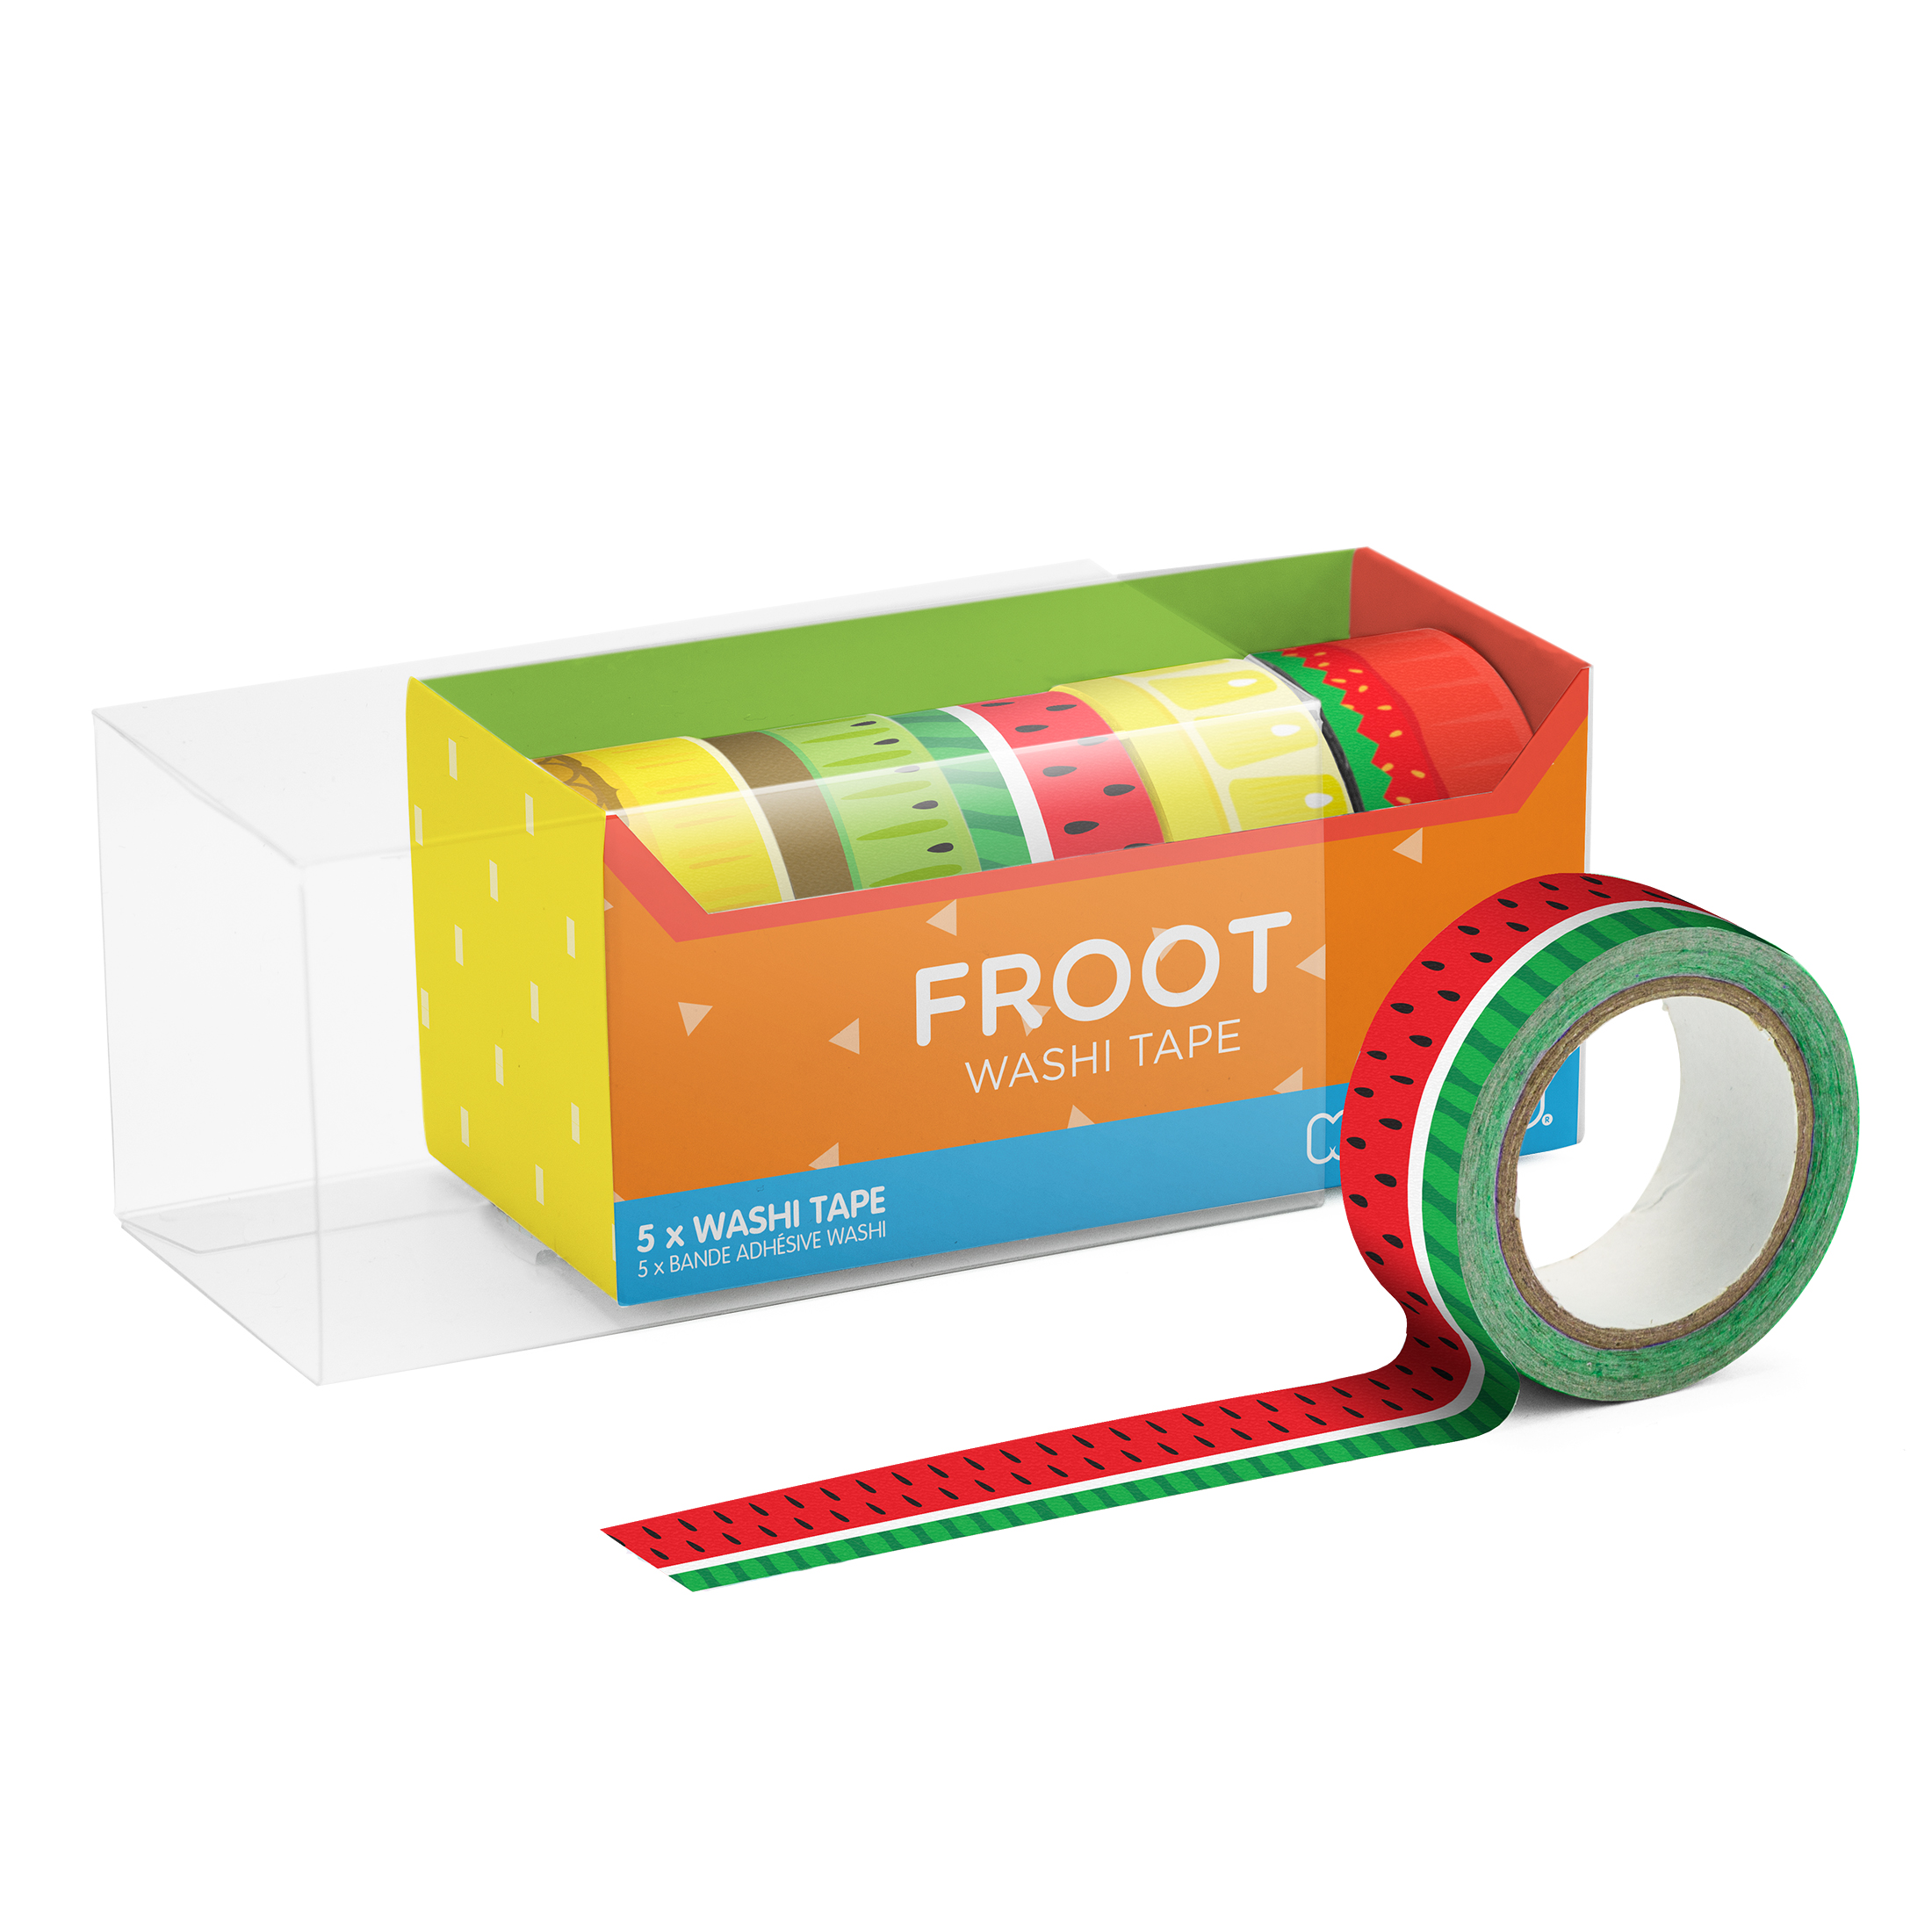 Froot Washi Tape Bandes décoratives